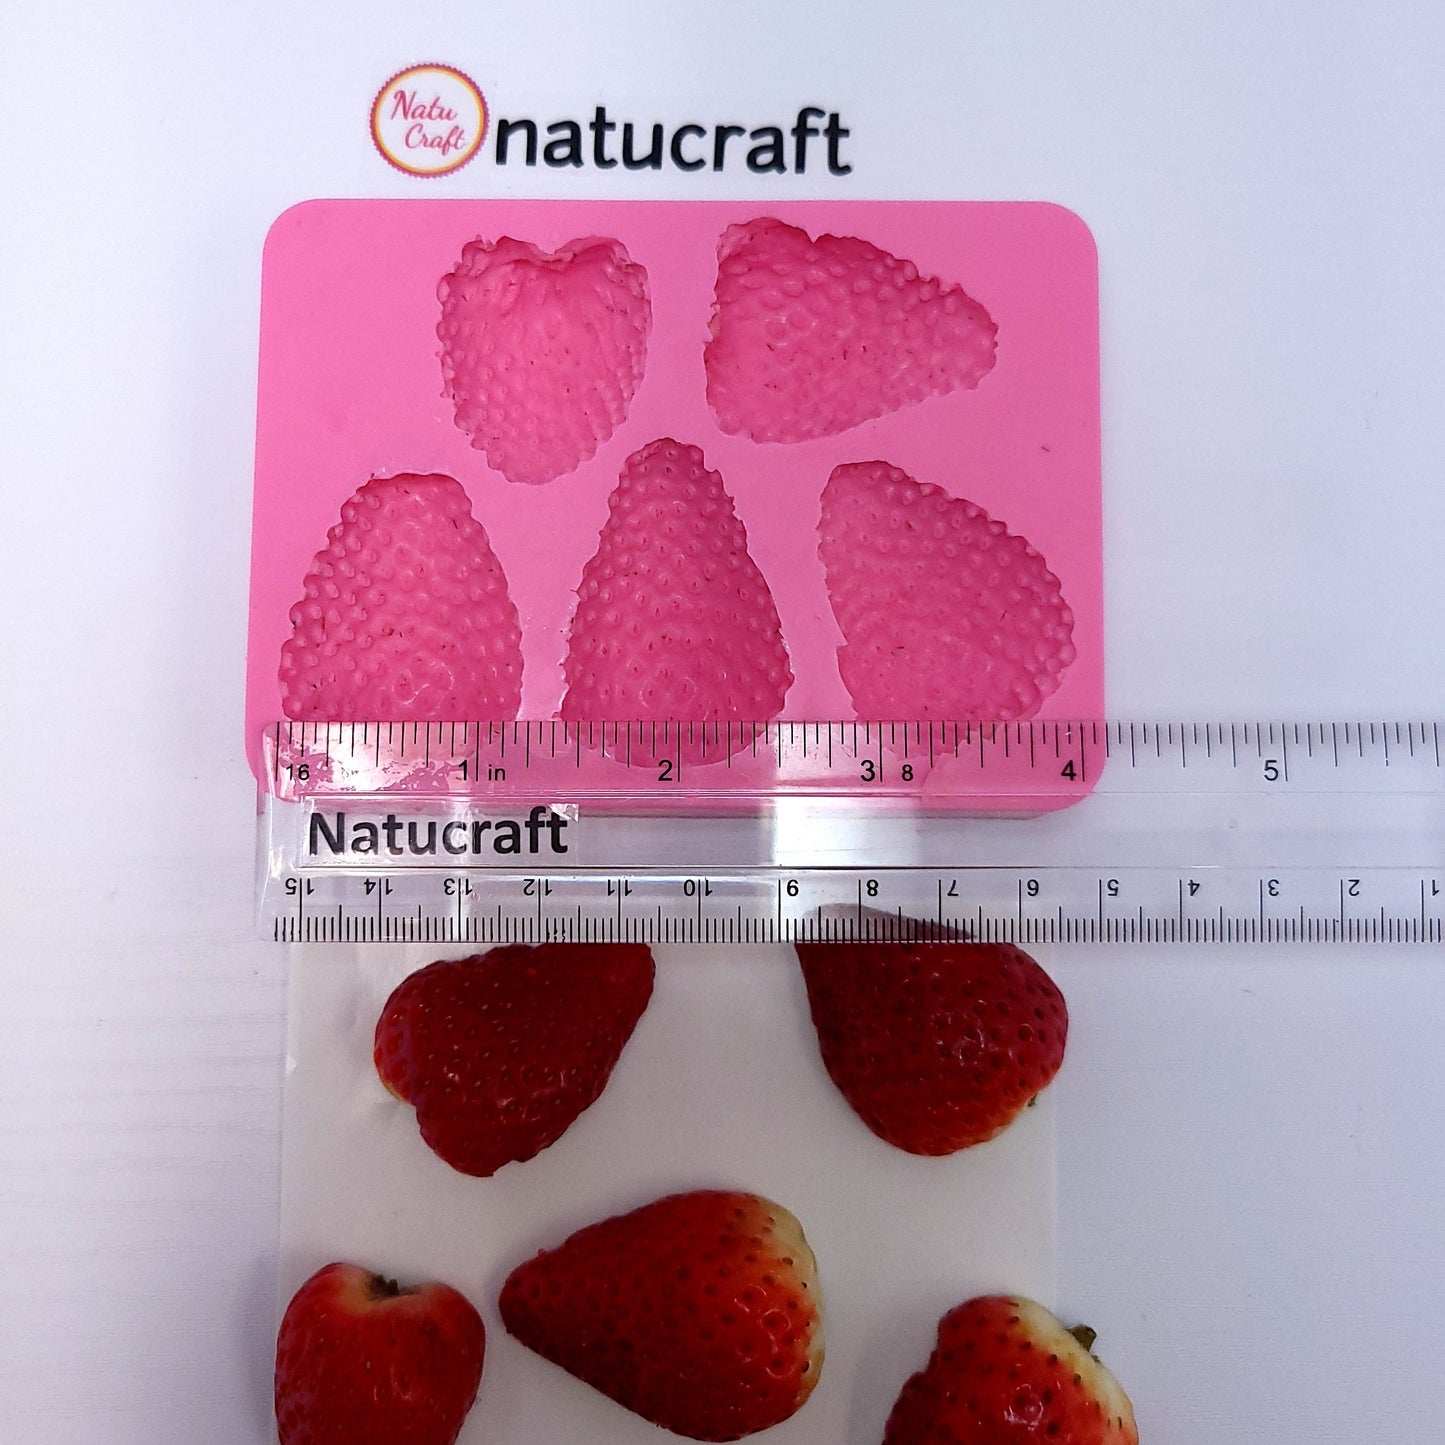 5pc Realistic Strawberries mold, Fruit Shape Silicone Mold, Soap and Candle embeds mold, Mold for Wax melts NC099